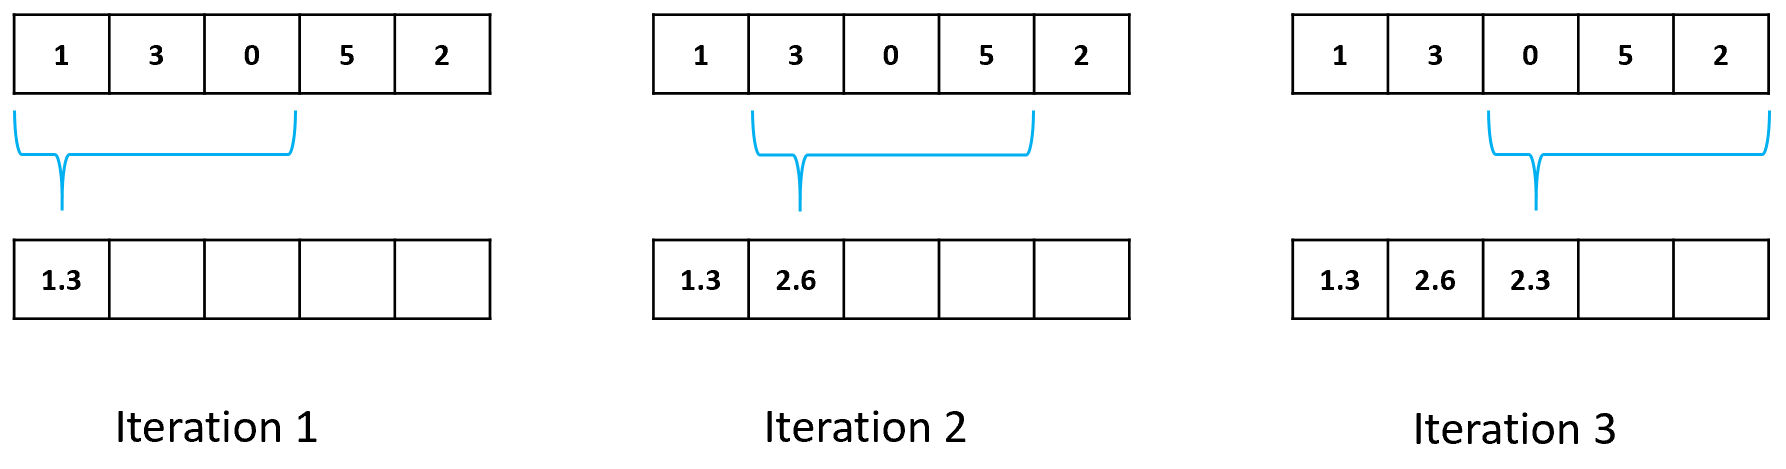 Simple moving average step by step with window size = 3. Top: original array; bottom: smoothed array.